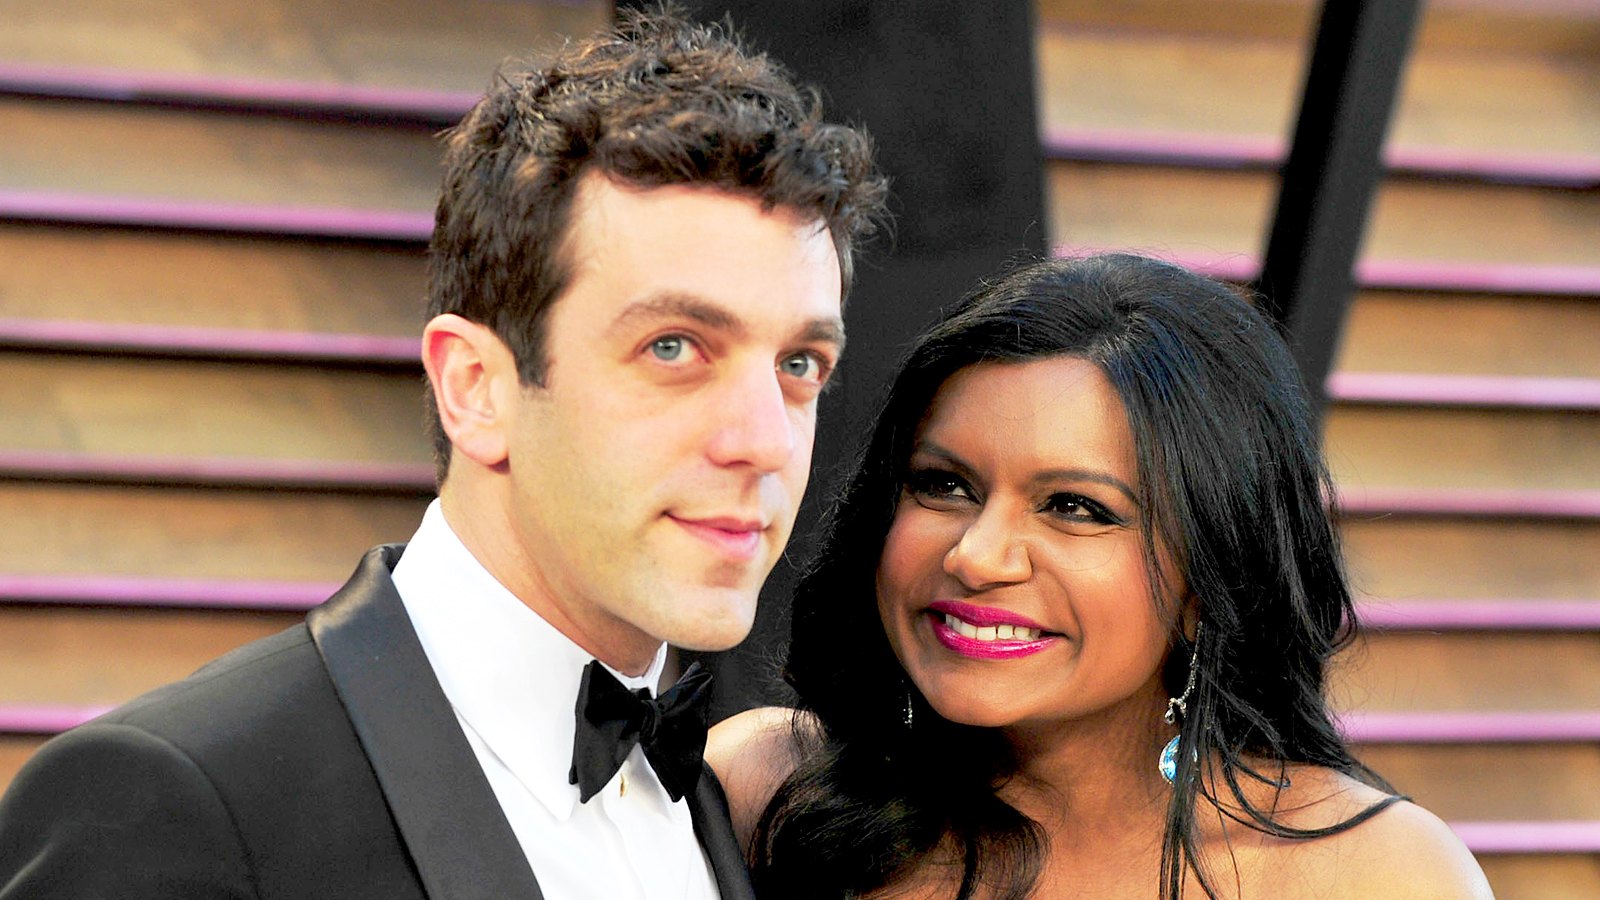 B.J. Novak and Mindy Kaling attend the 2014 Vanity Fair Oscar Party hosted by Graydon Carter in West Hollywood, California.